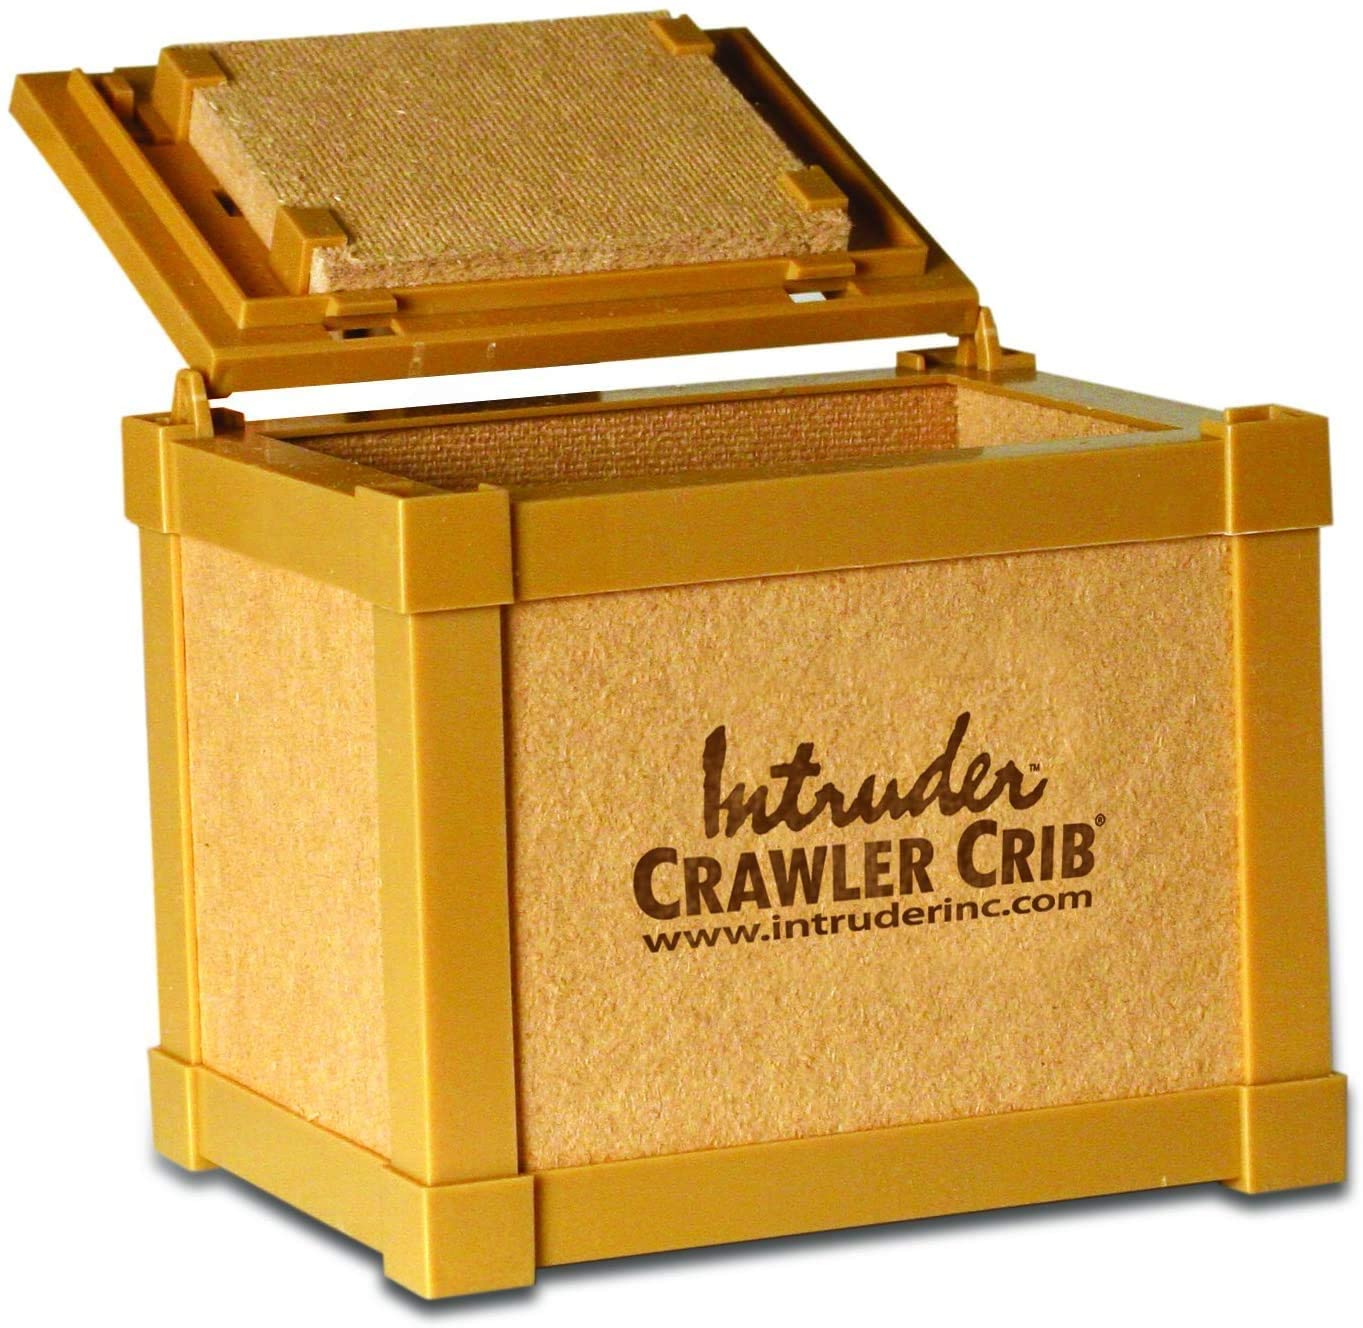 A box with lid open for night crawlers.